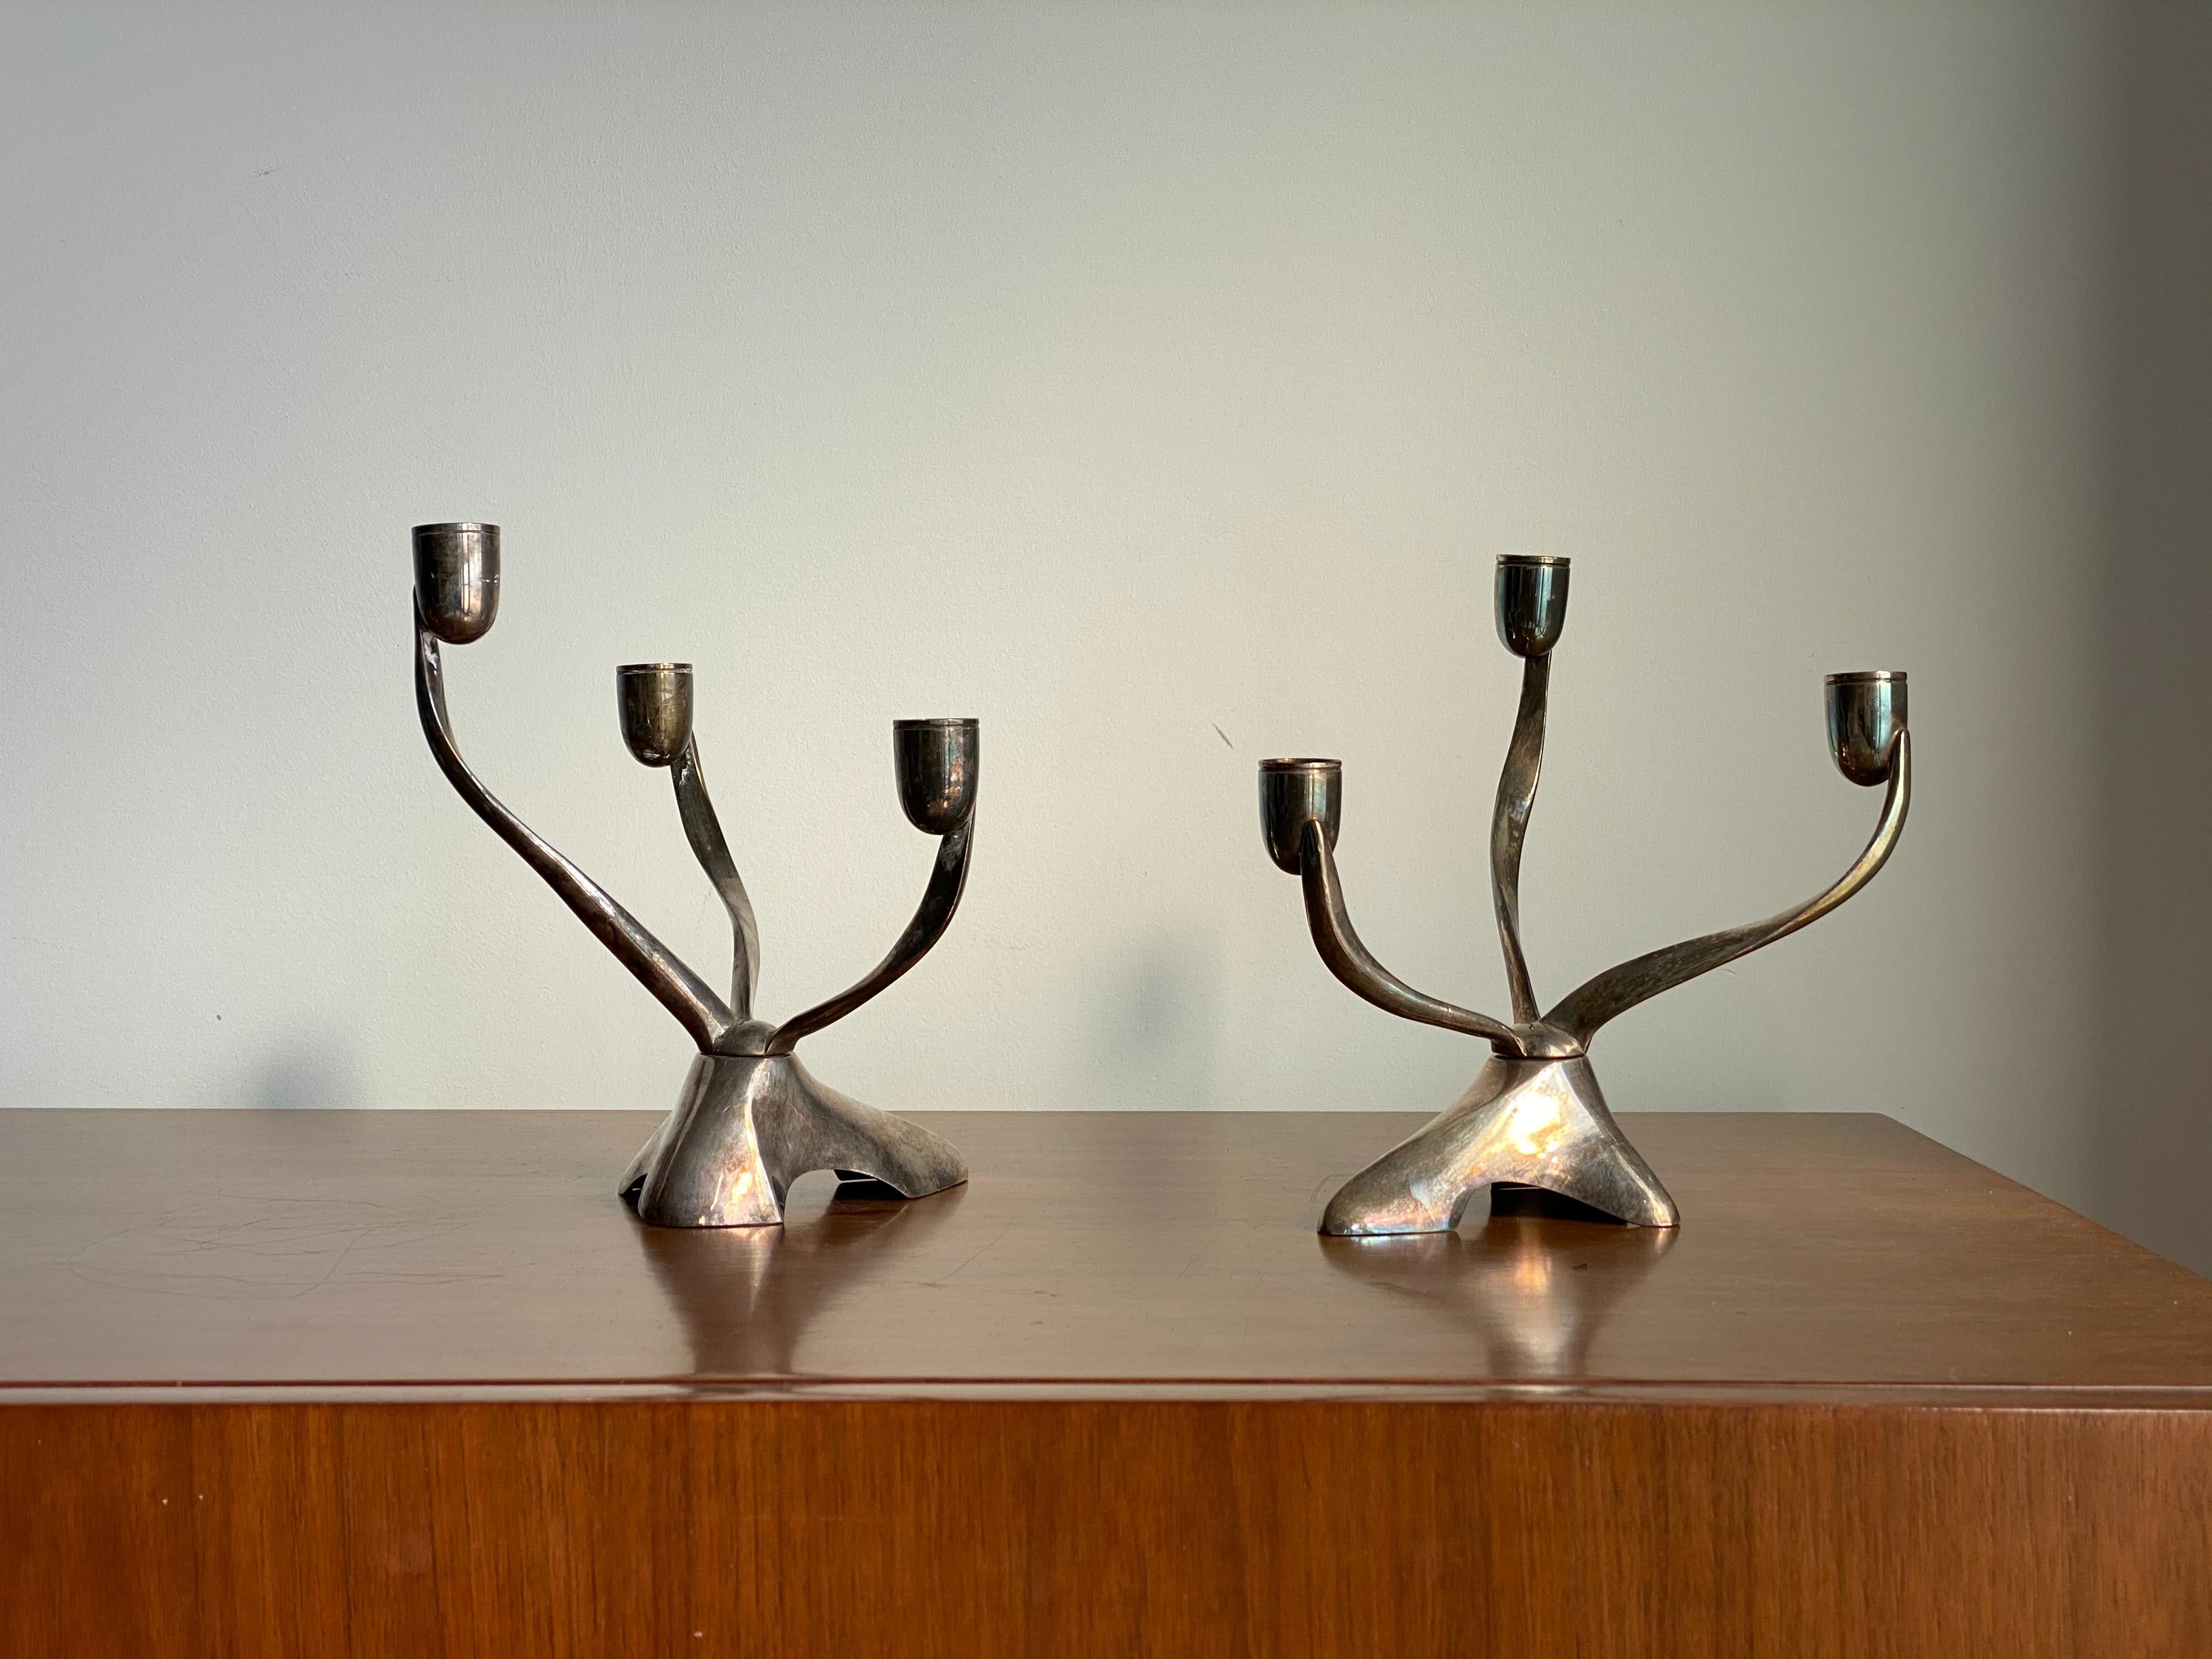 A pair of organic and sculptural candelabras. Designed by Robert H. Ramp for Reed & Barton in the 1950s. Adjustable in silver plate. Stamped with makers mark.

Other designers of the period include Buckminster Fuller, Isamu Noguchi, Paul Frankl,